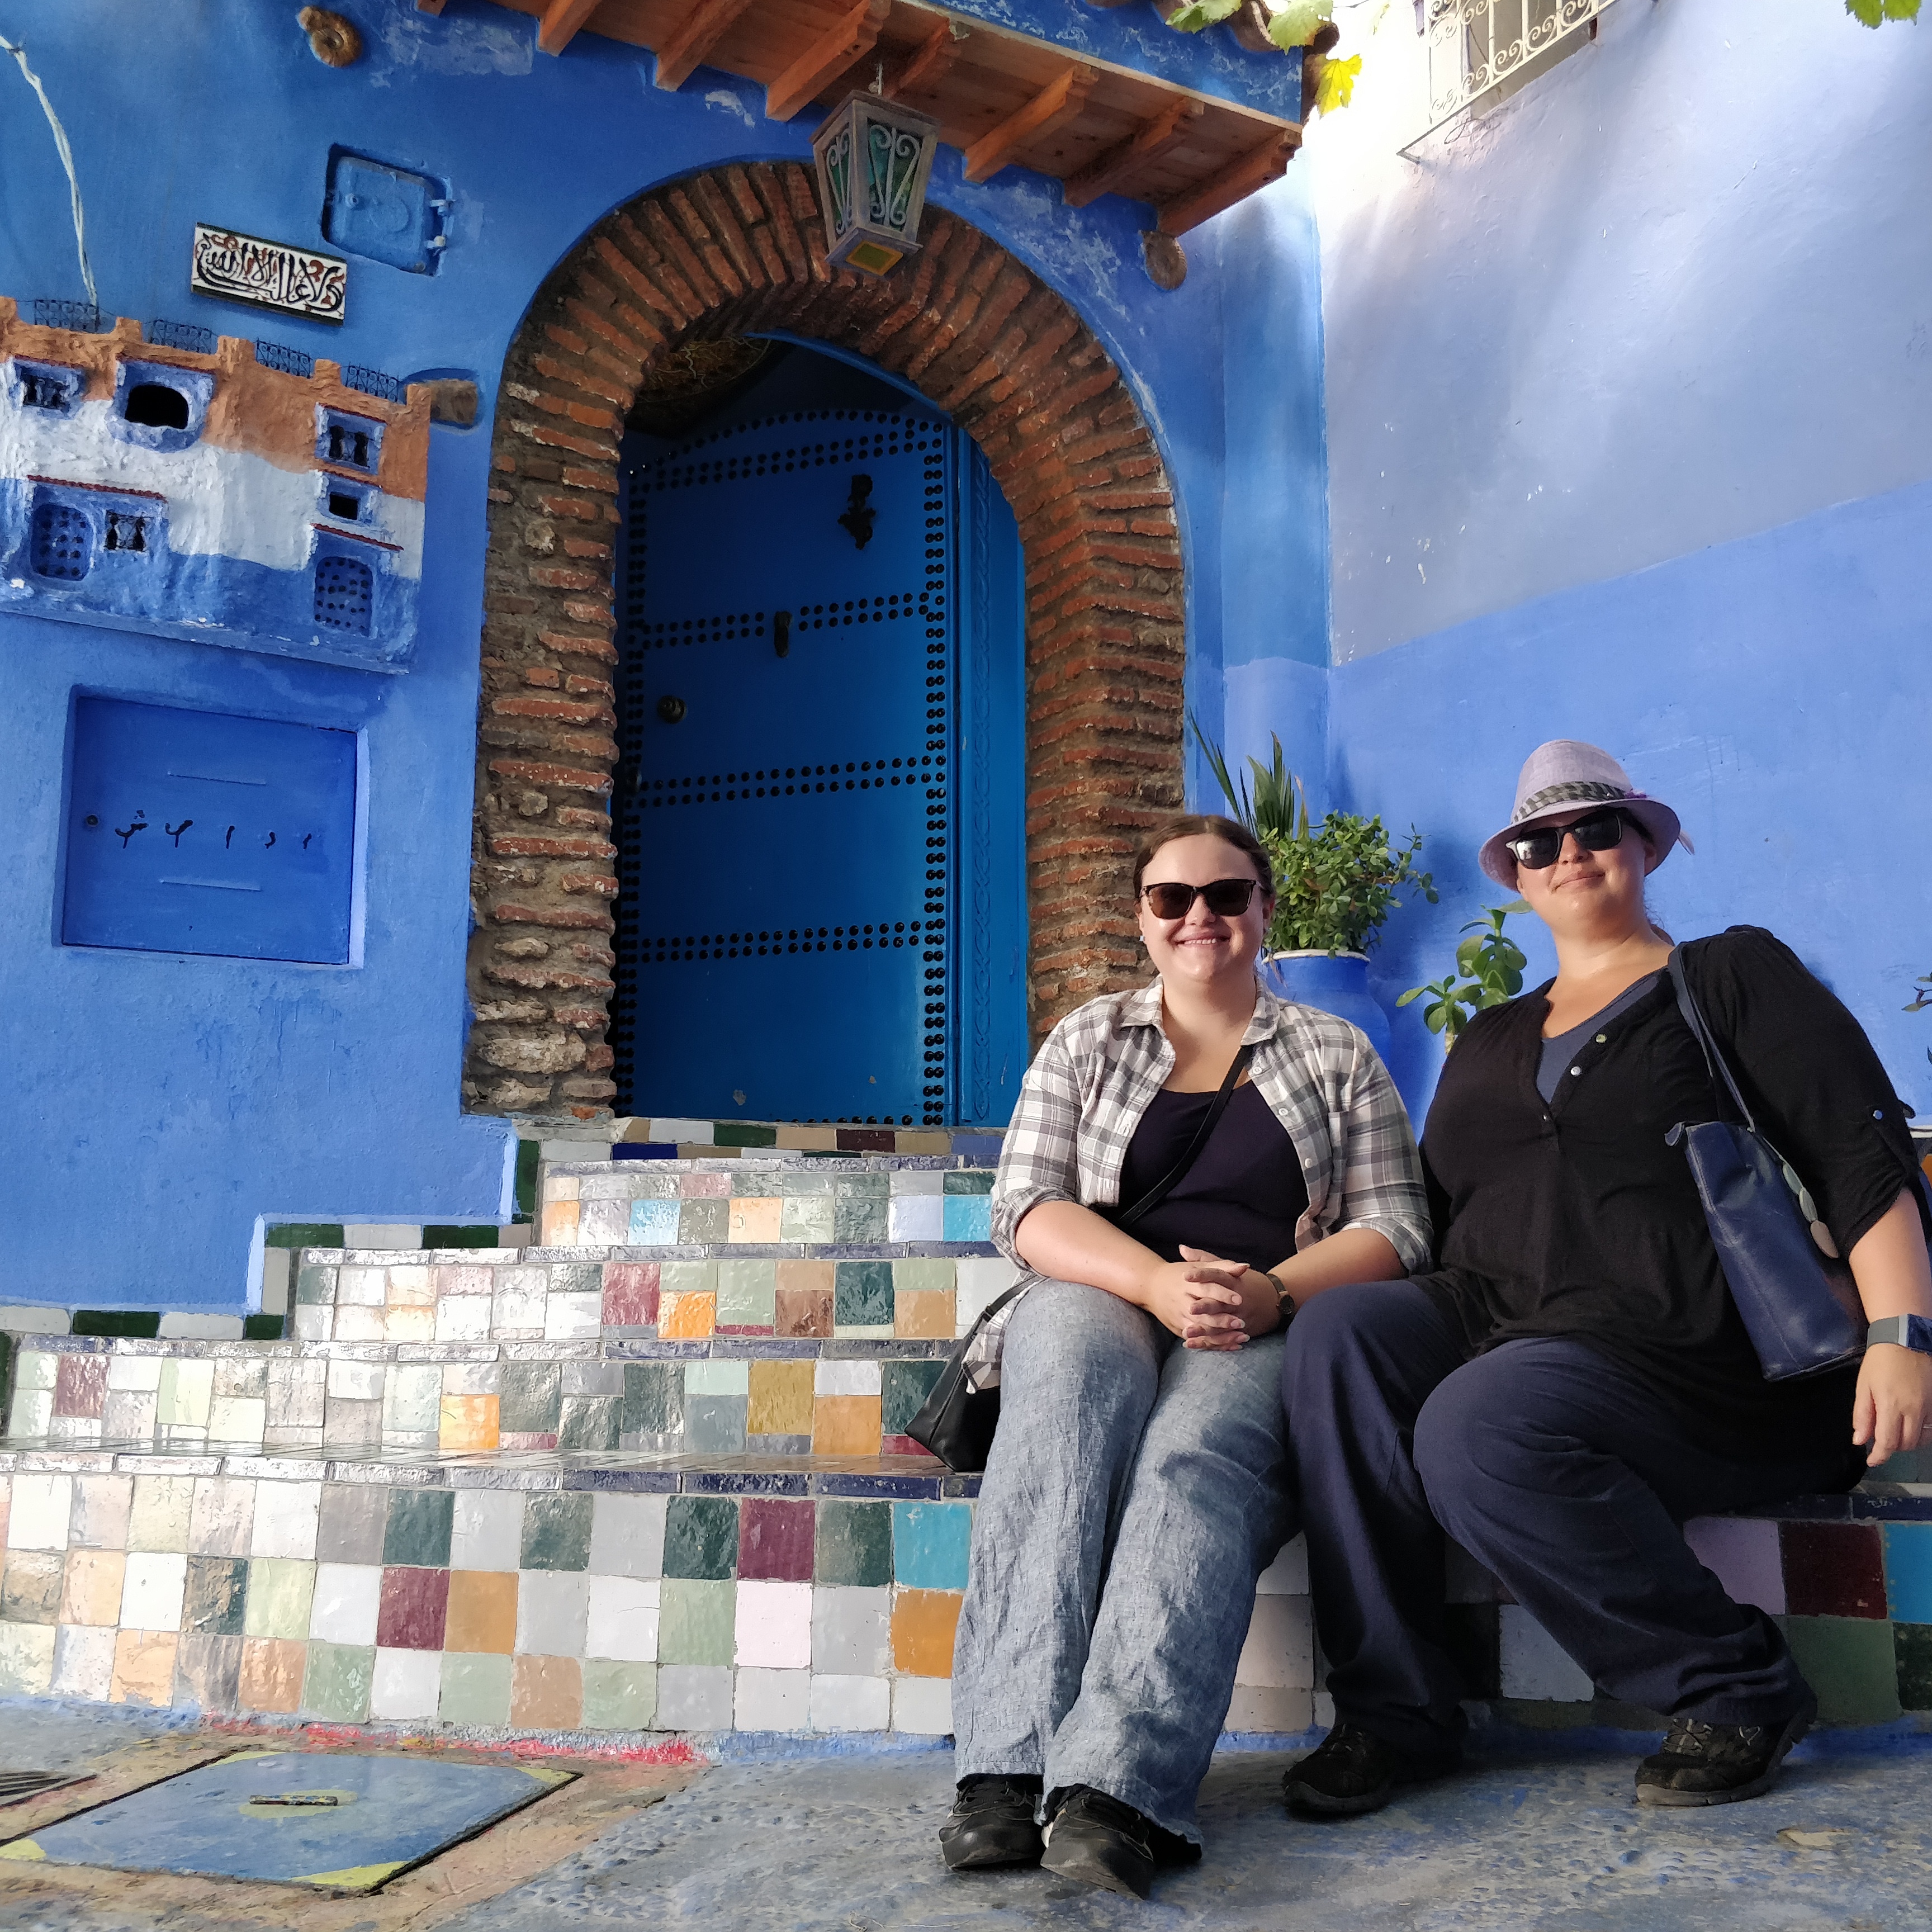 Me and my sister in Chefchaouen, Morocco